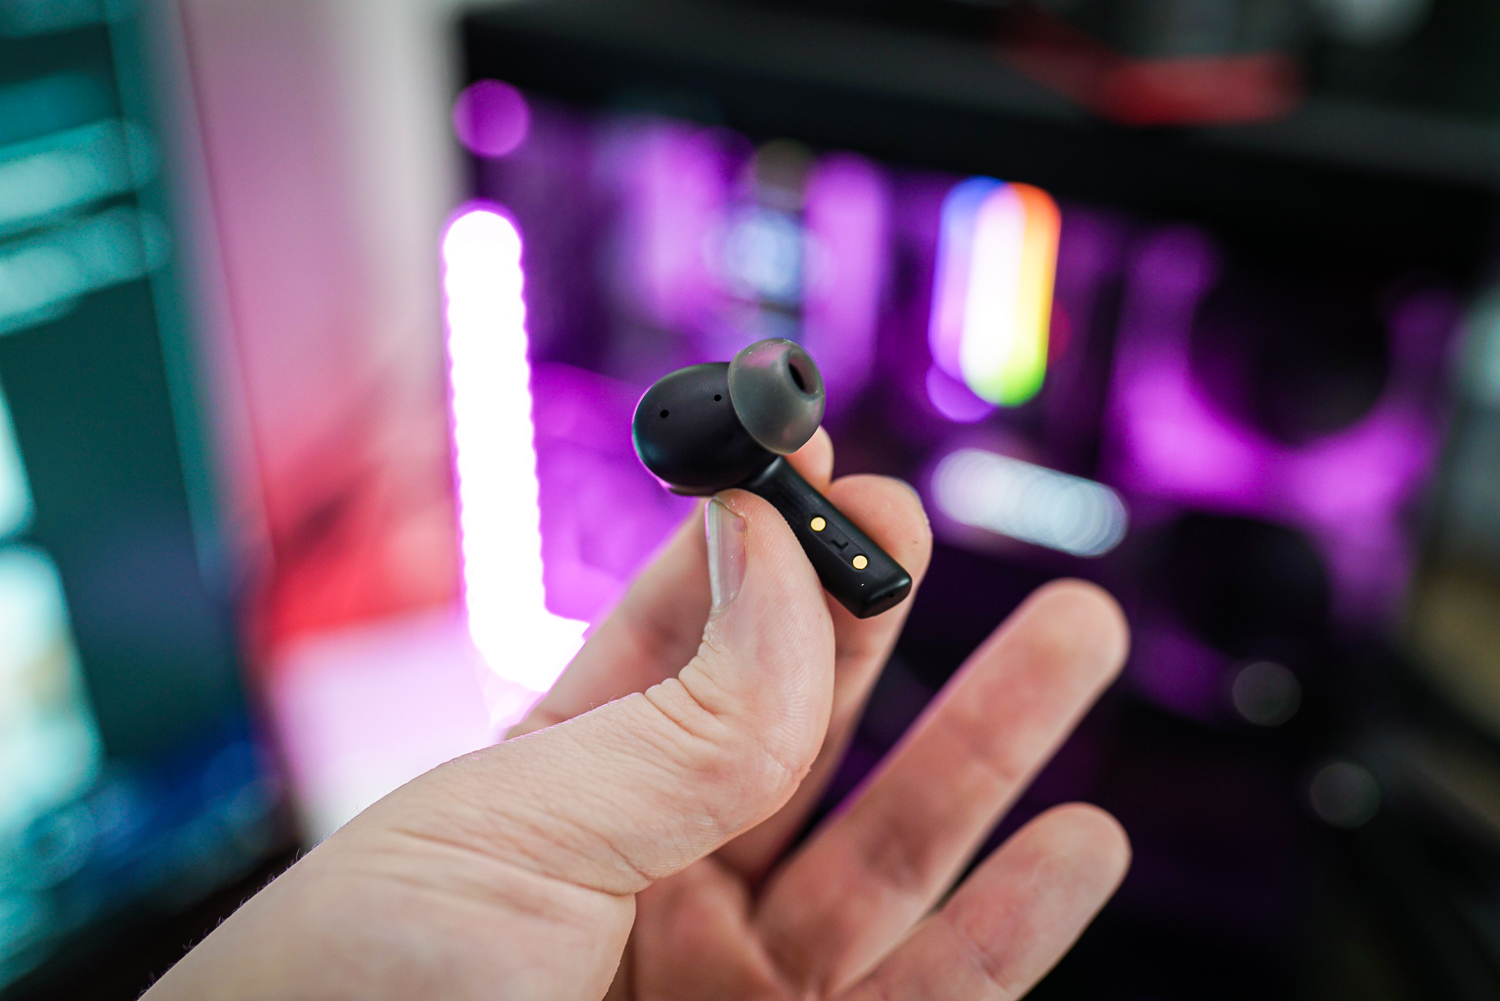 I want to love Asus’ gaming earbuds, but there are problems